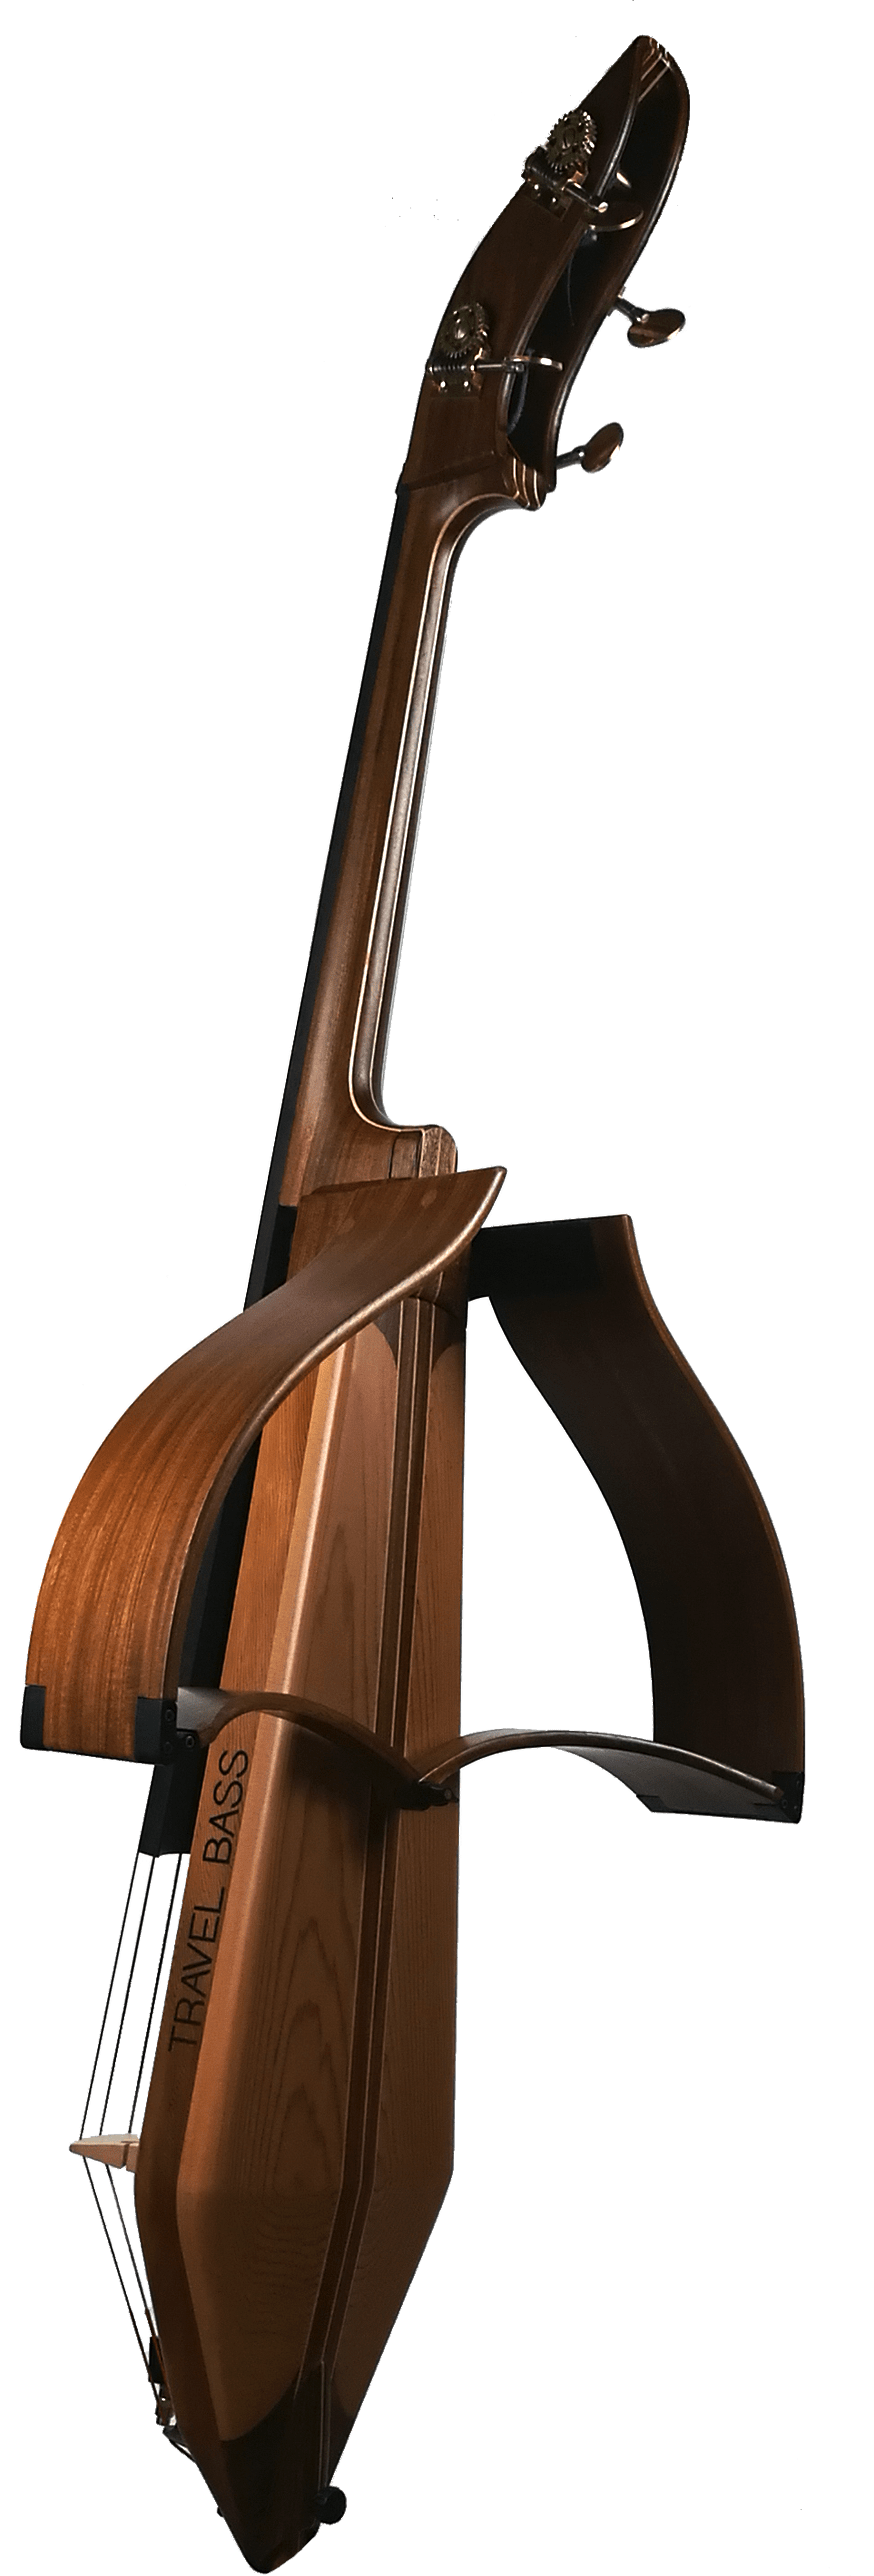 Double Bass Download Transparent PNG Image